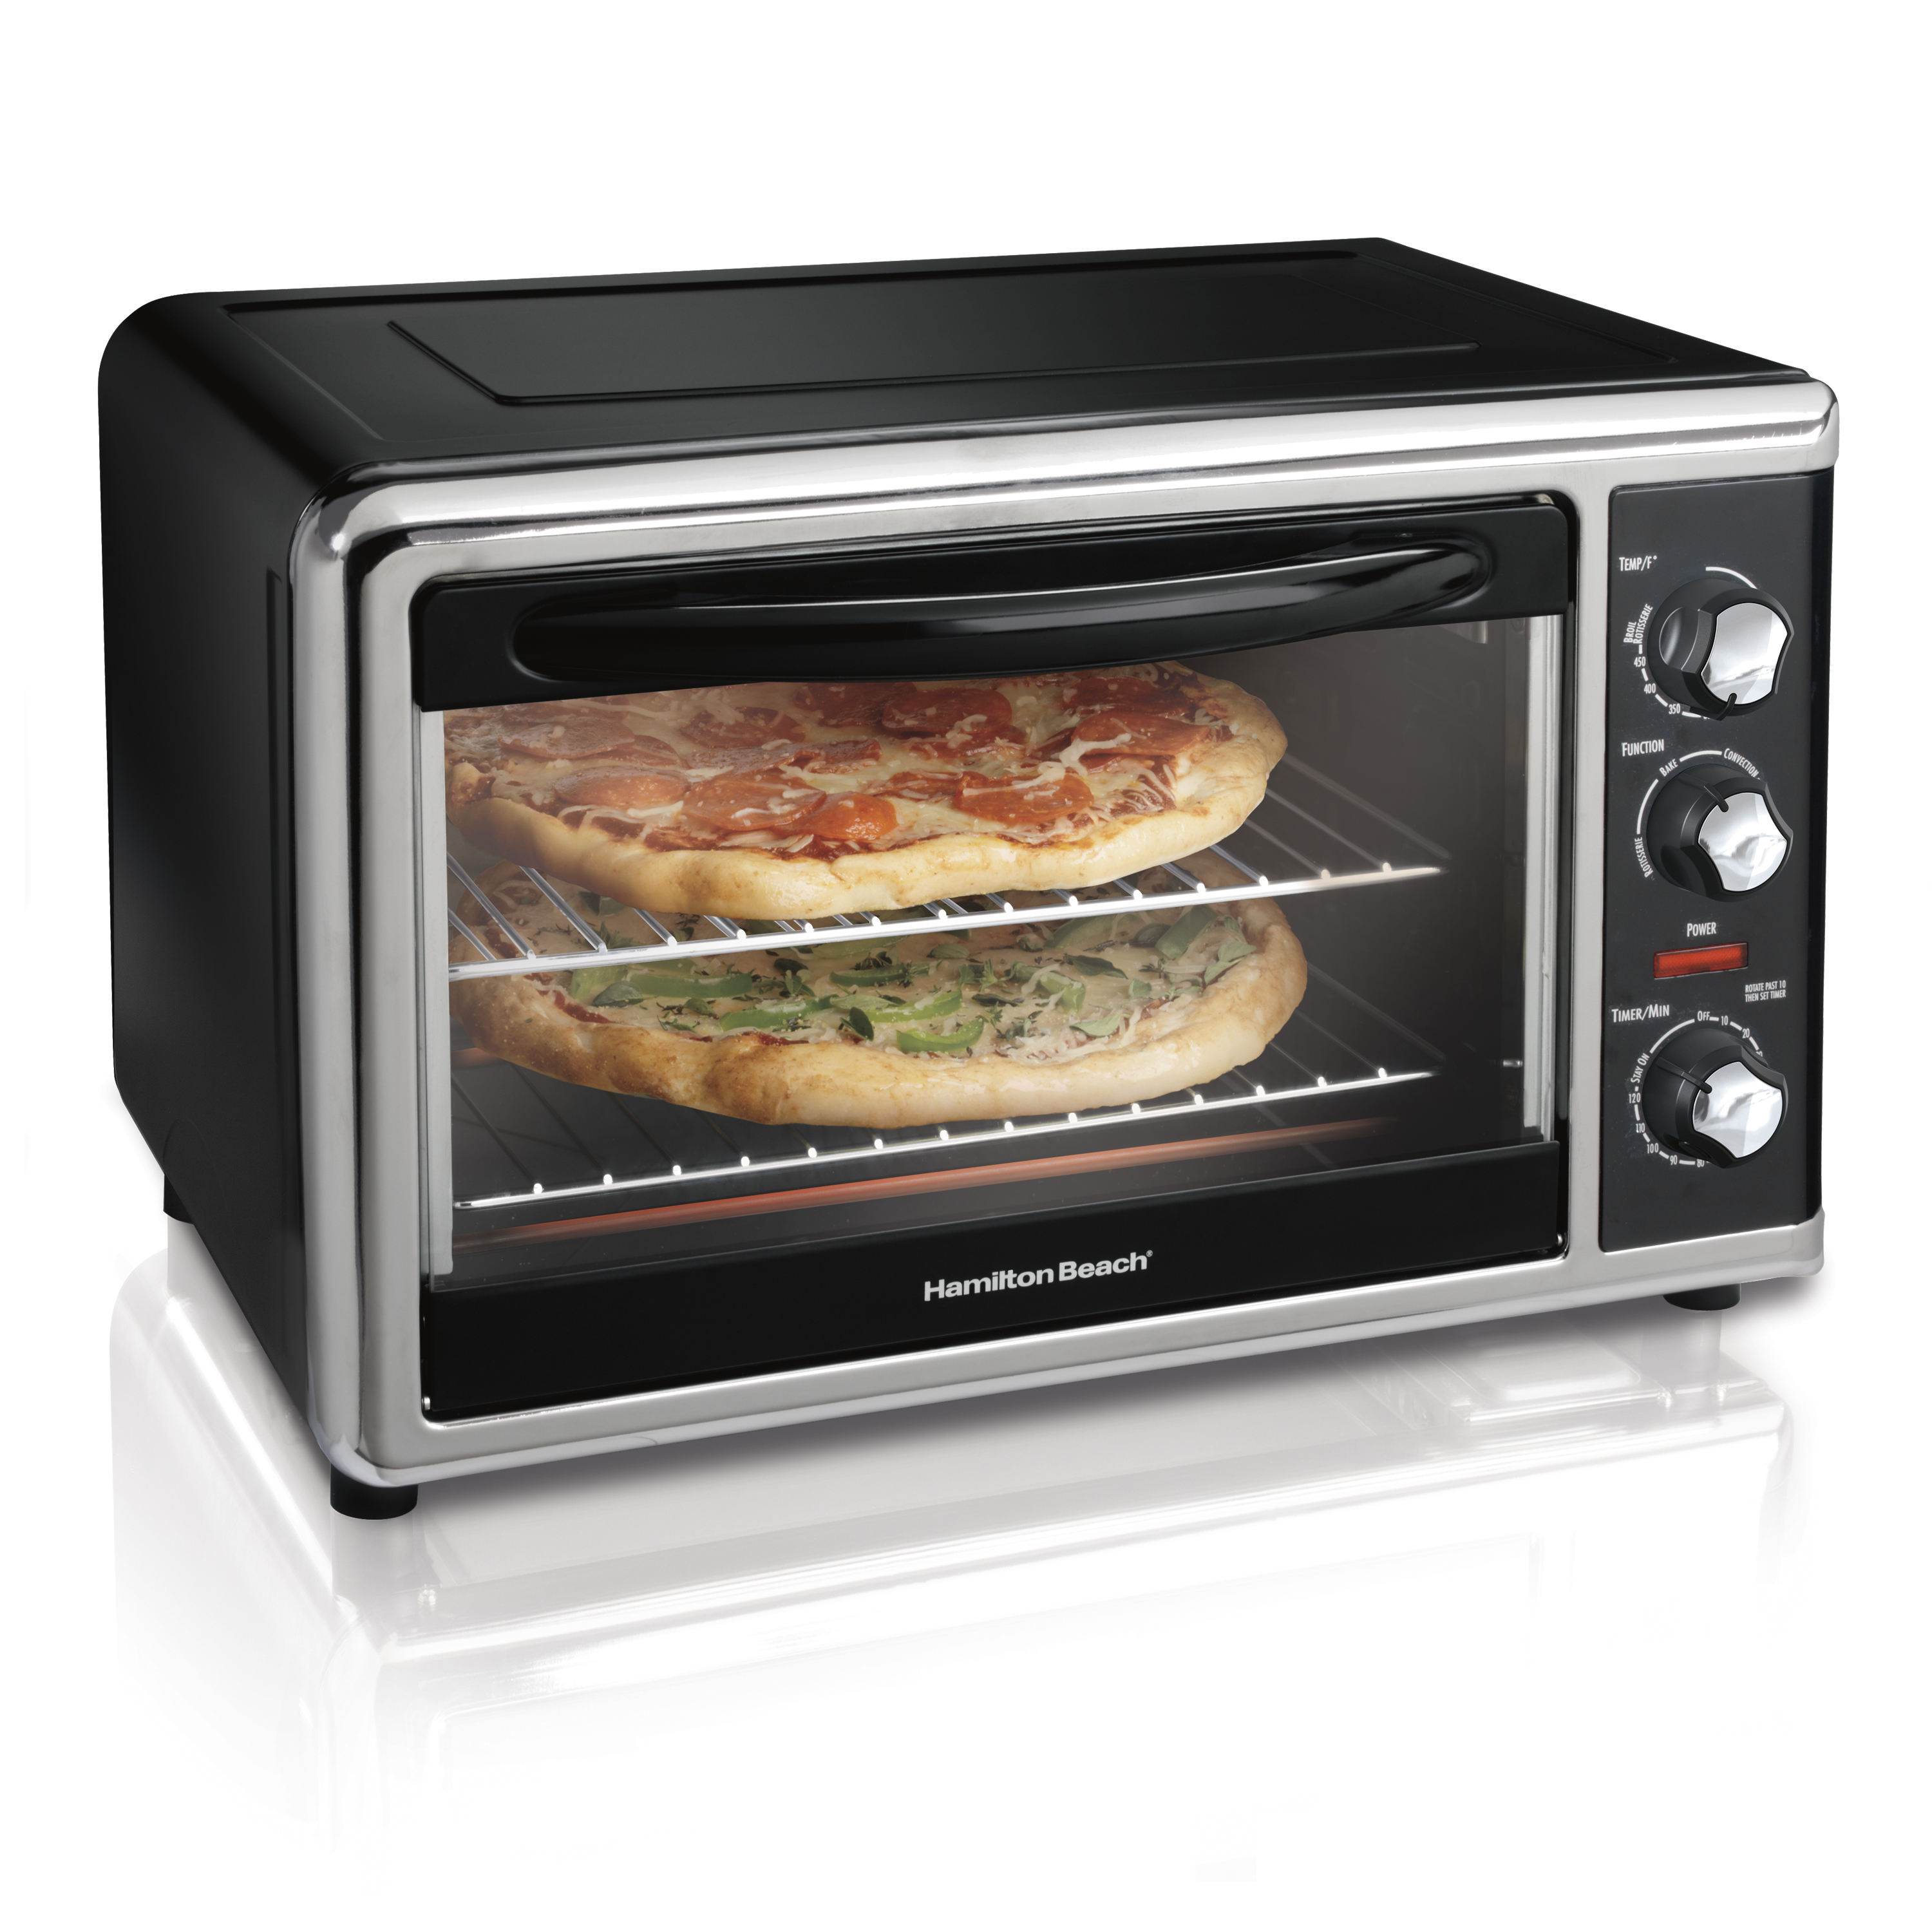 Hamilton Beach Countertop Oven with Convection and Rotisserie, Baking, Broil, Extra Large Capacity, Silver, 31100D - image 1 of 9